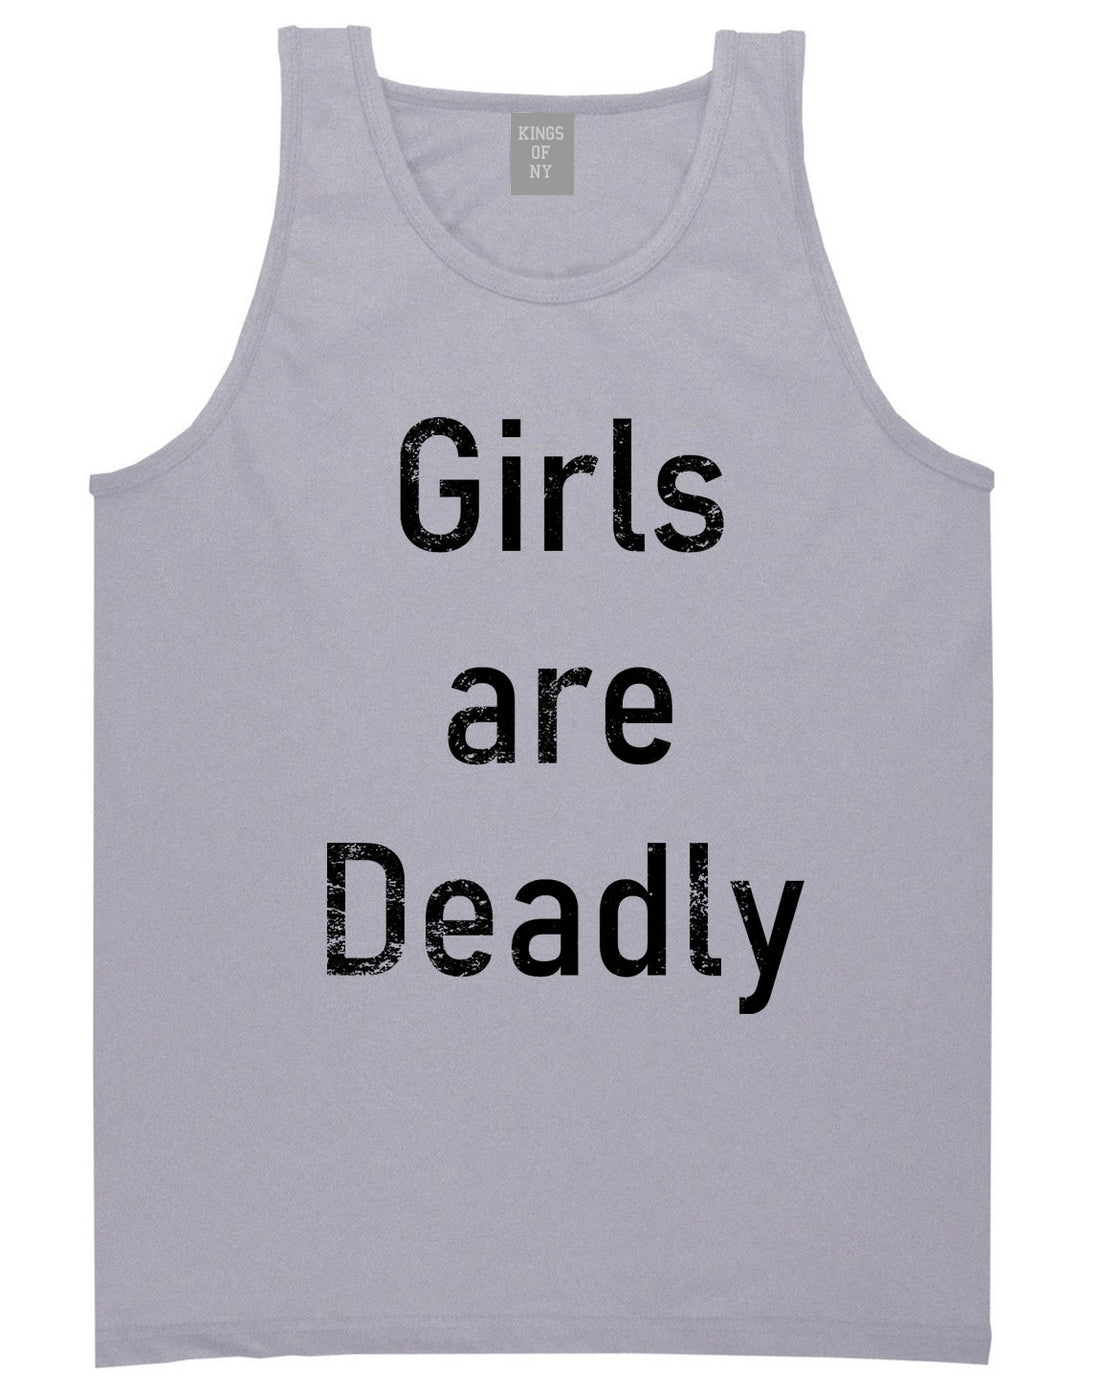 Girls Are Deadly Mens Tank Top Shirt Grey By Kings Of NY